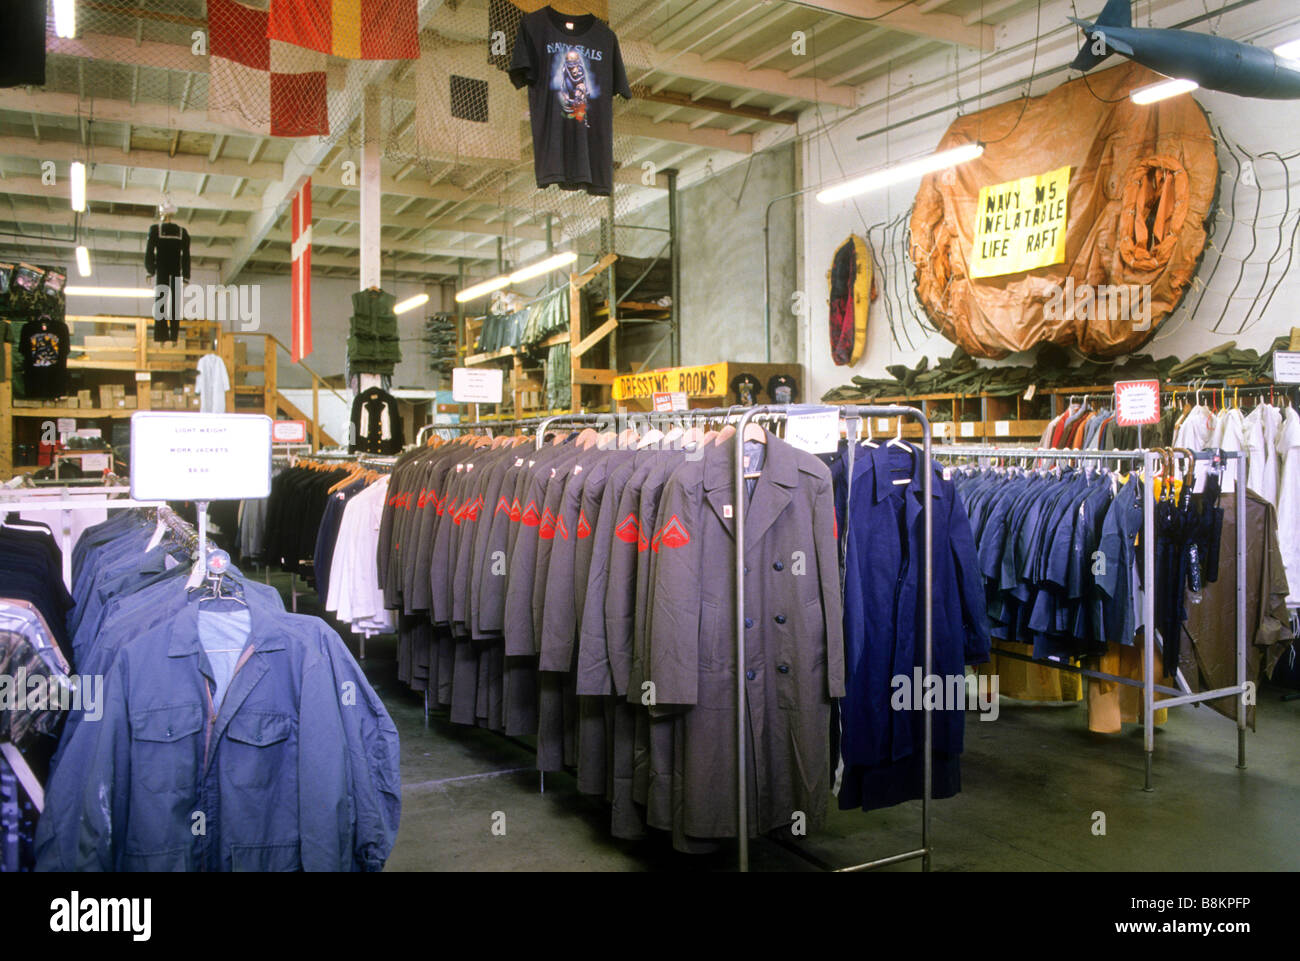 Interior of Army-Navy store with surplus military items on sale Stock Photo